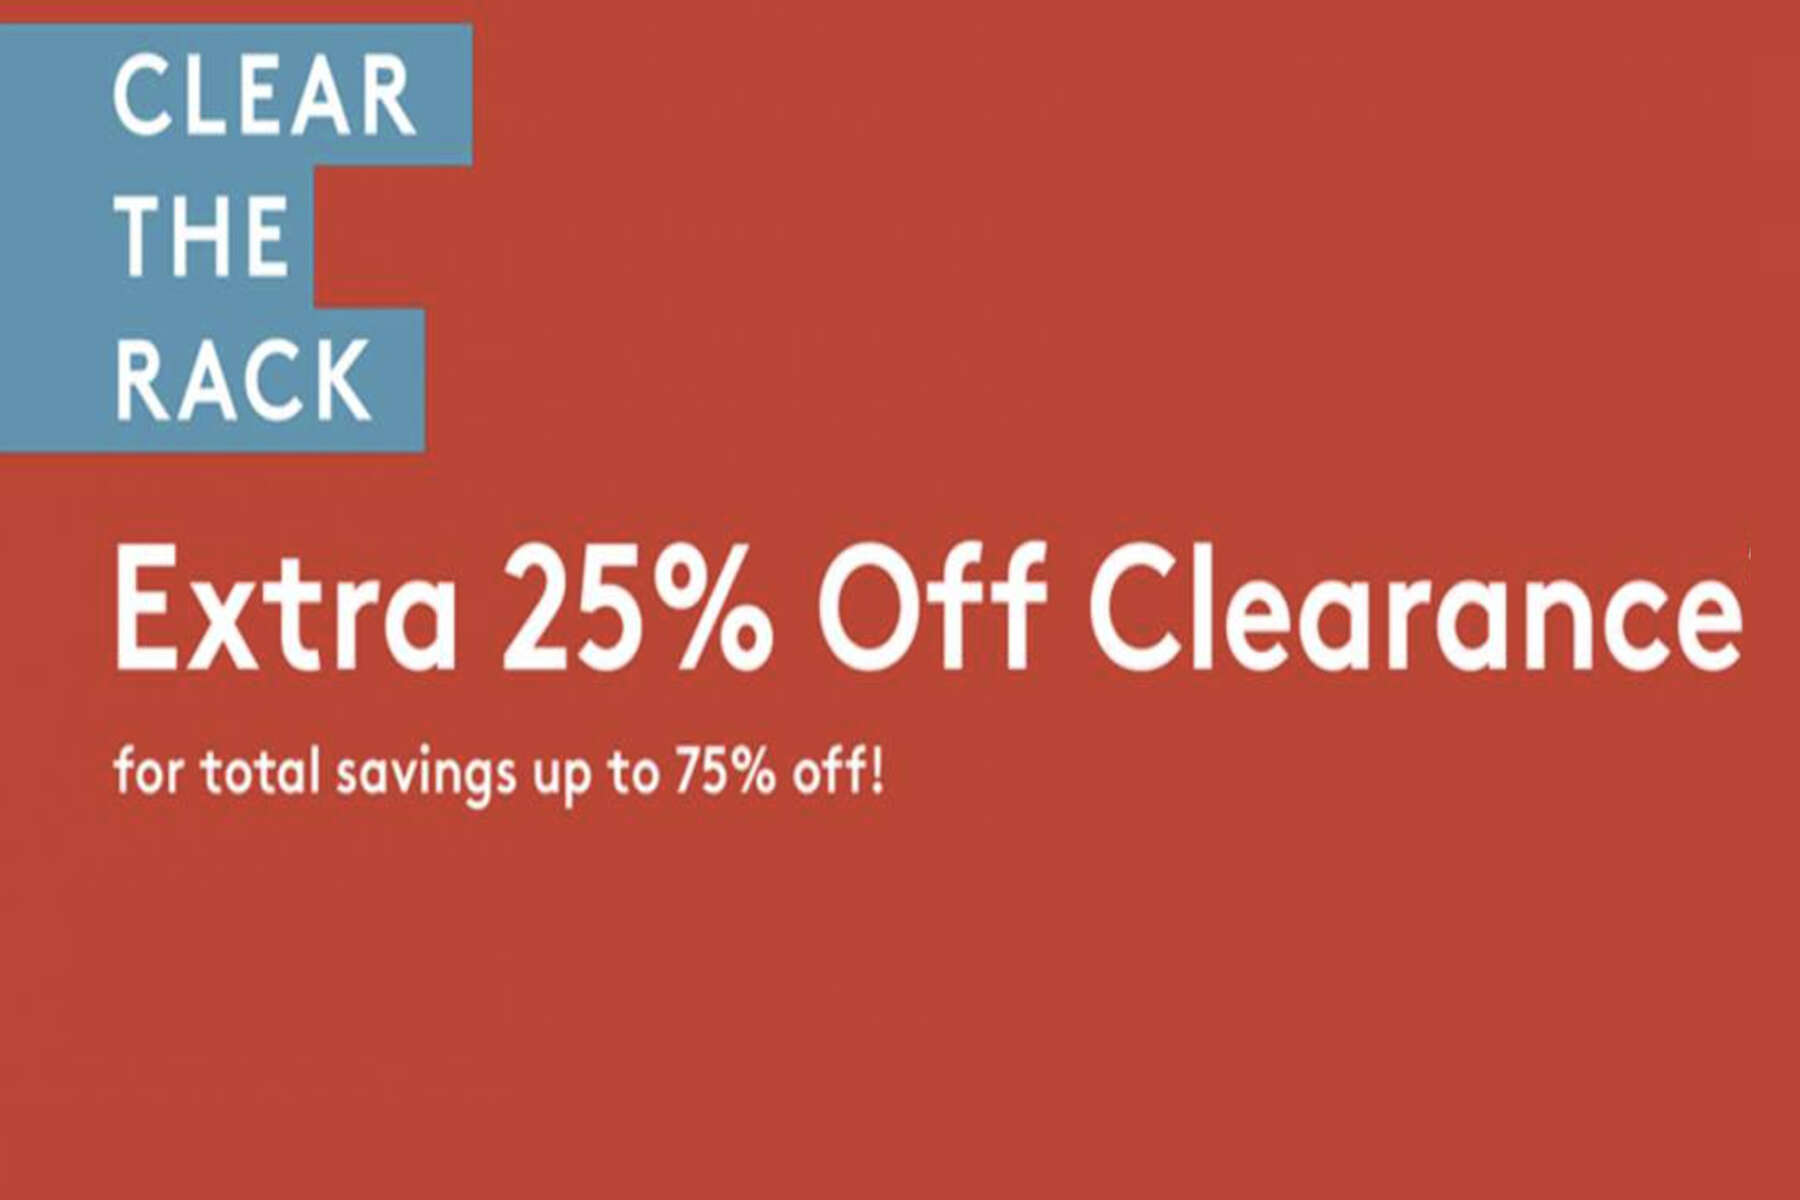 Clear the Rack is back at Nordstrom Rack for Memorial Day